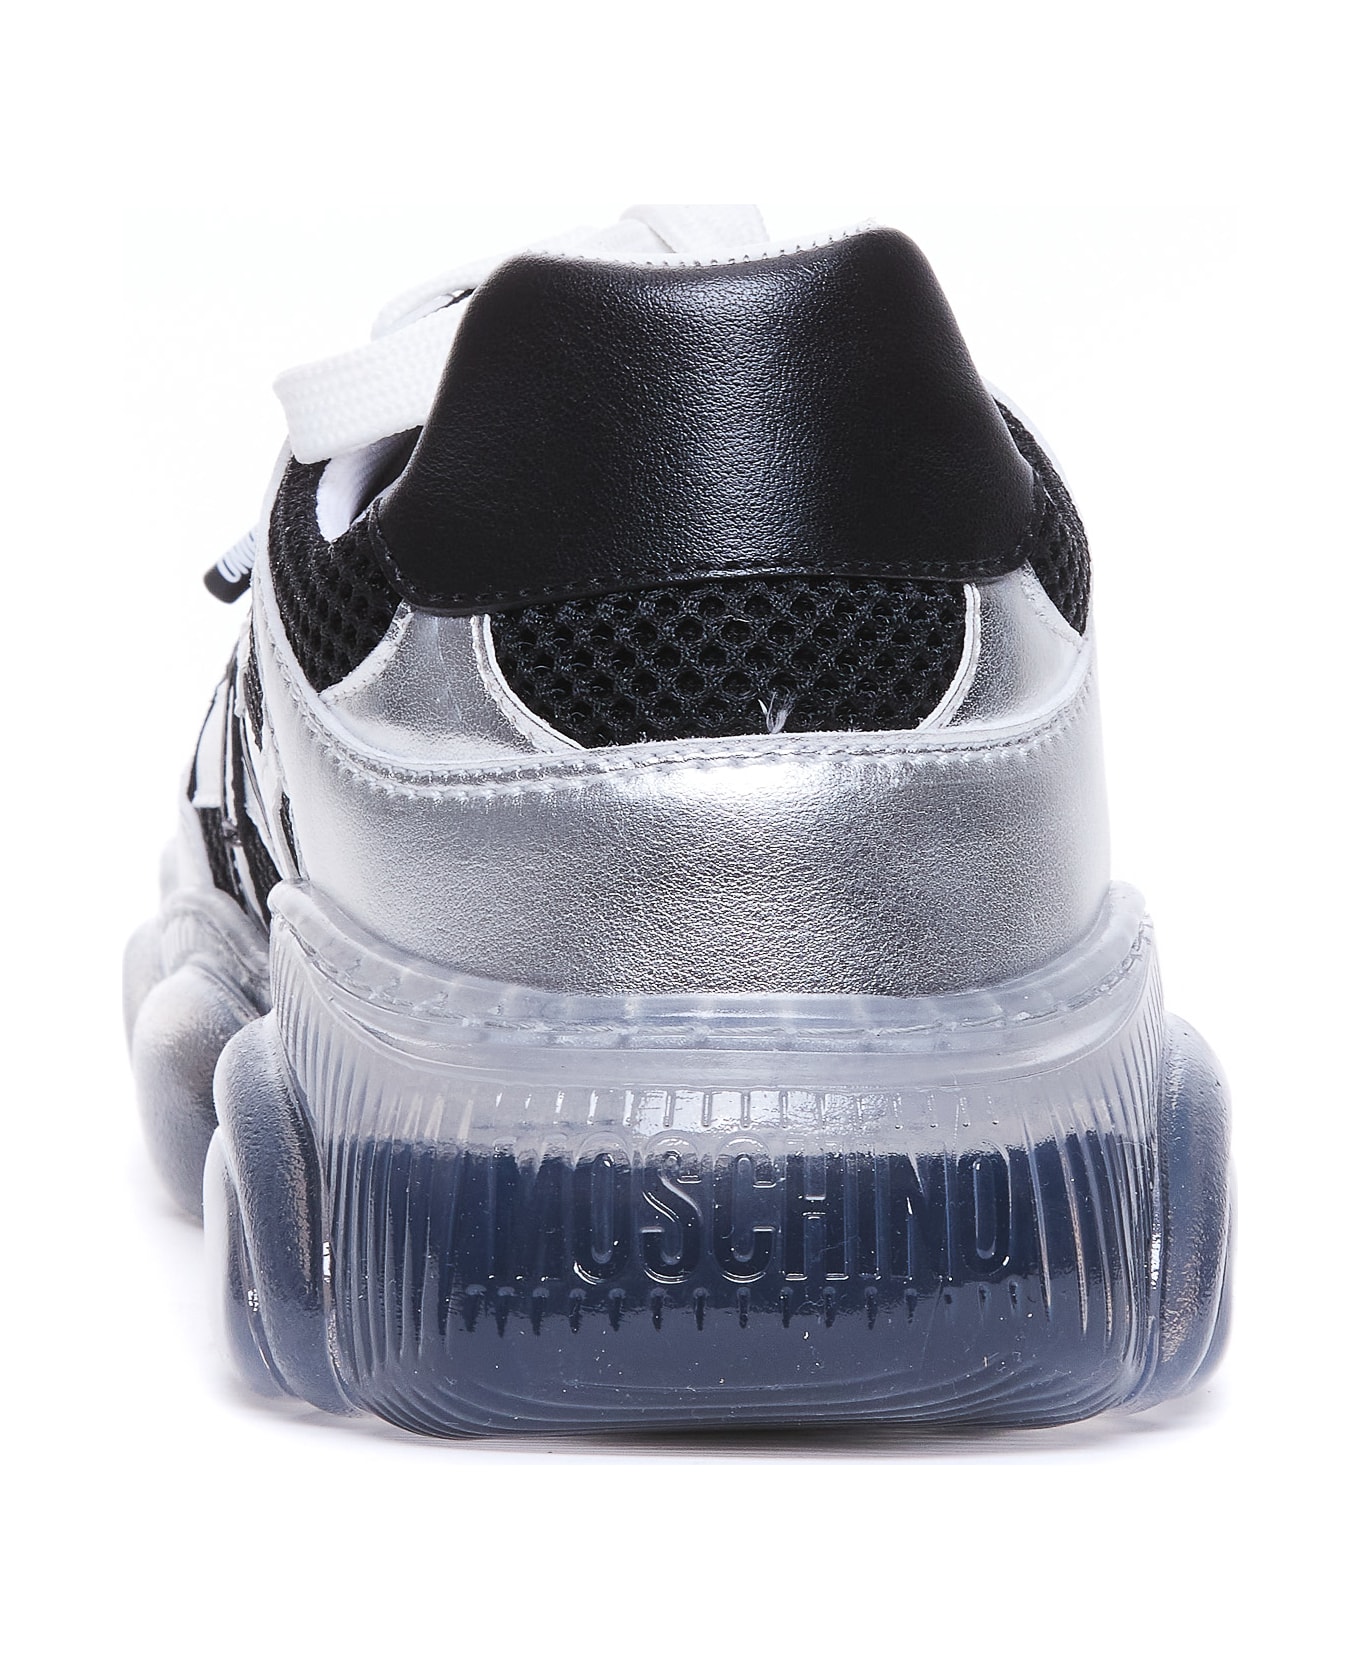 Moschino Teddy Shoes With Transparent Sole - Black スニーカー